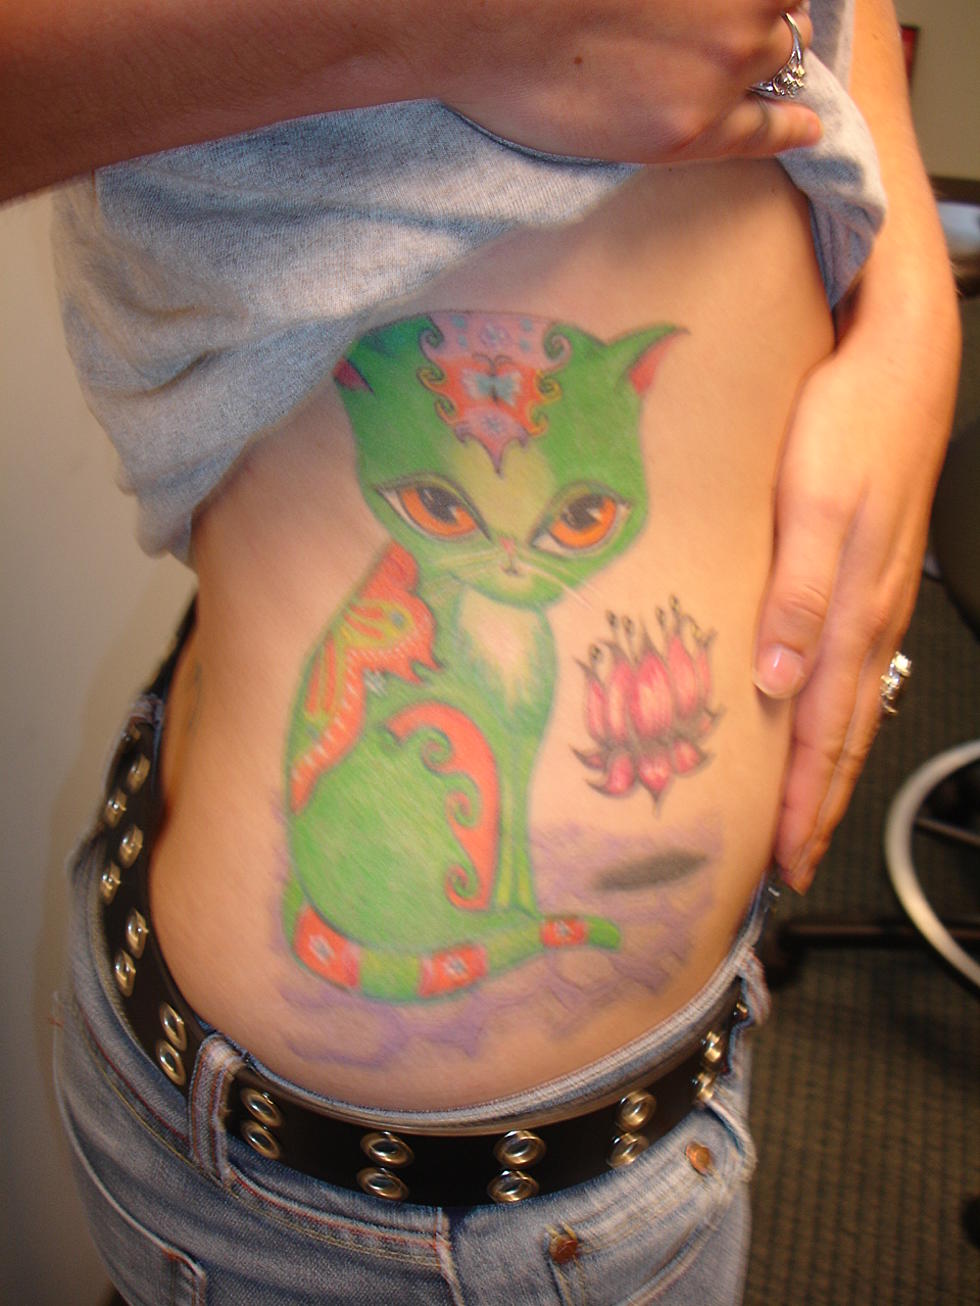 Does Kat’s Cat Tattoo Actually Look Like a Frog? [PICTURE]